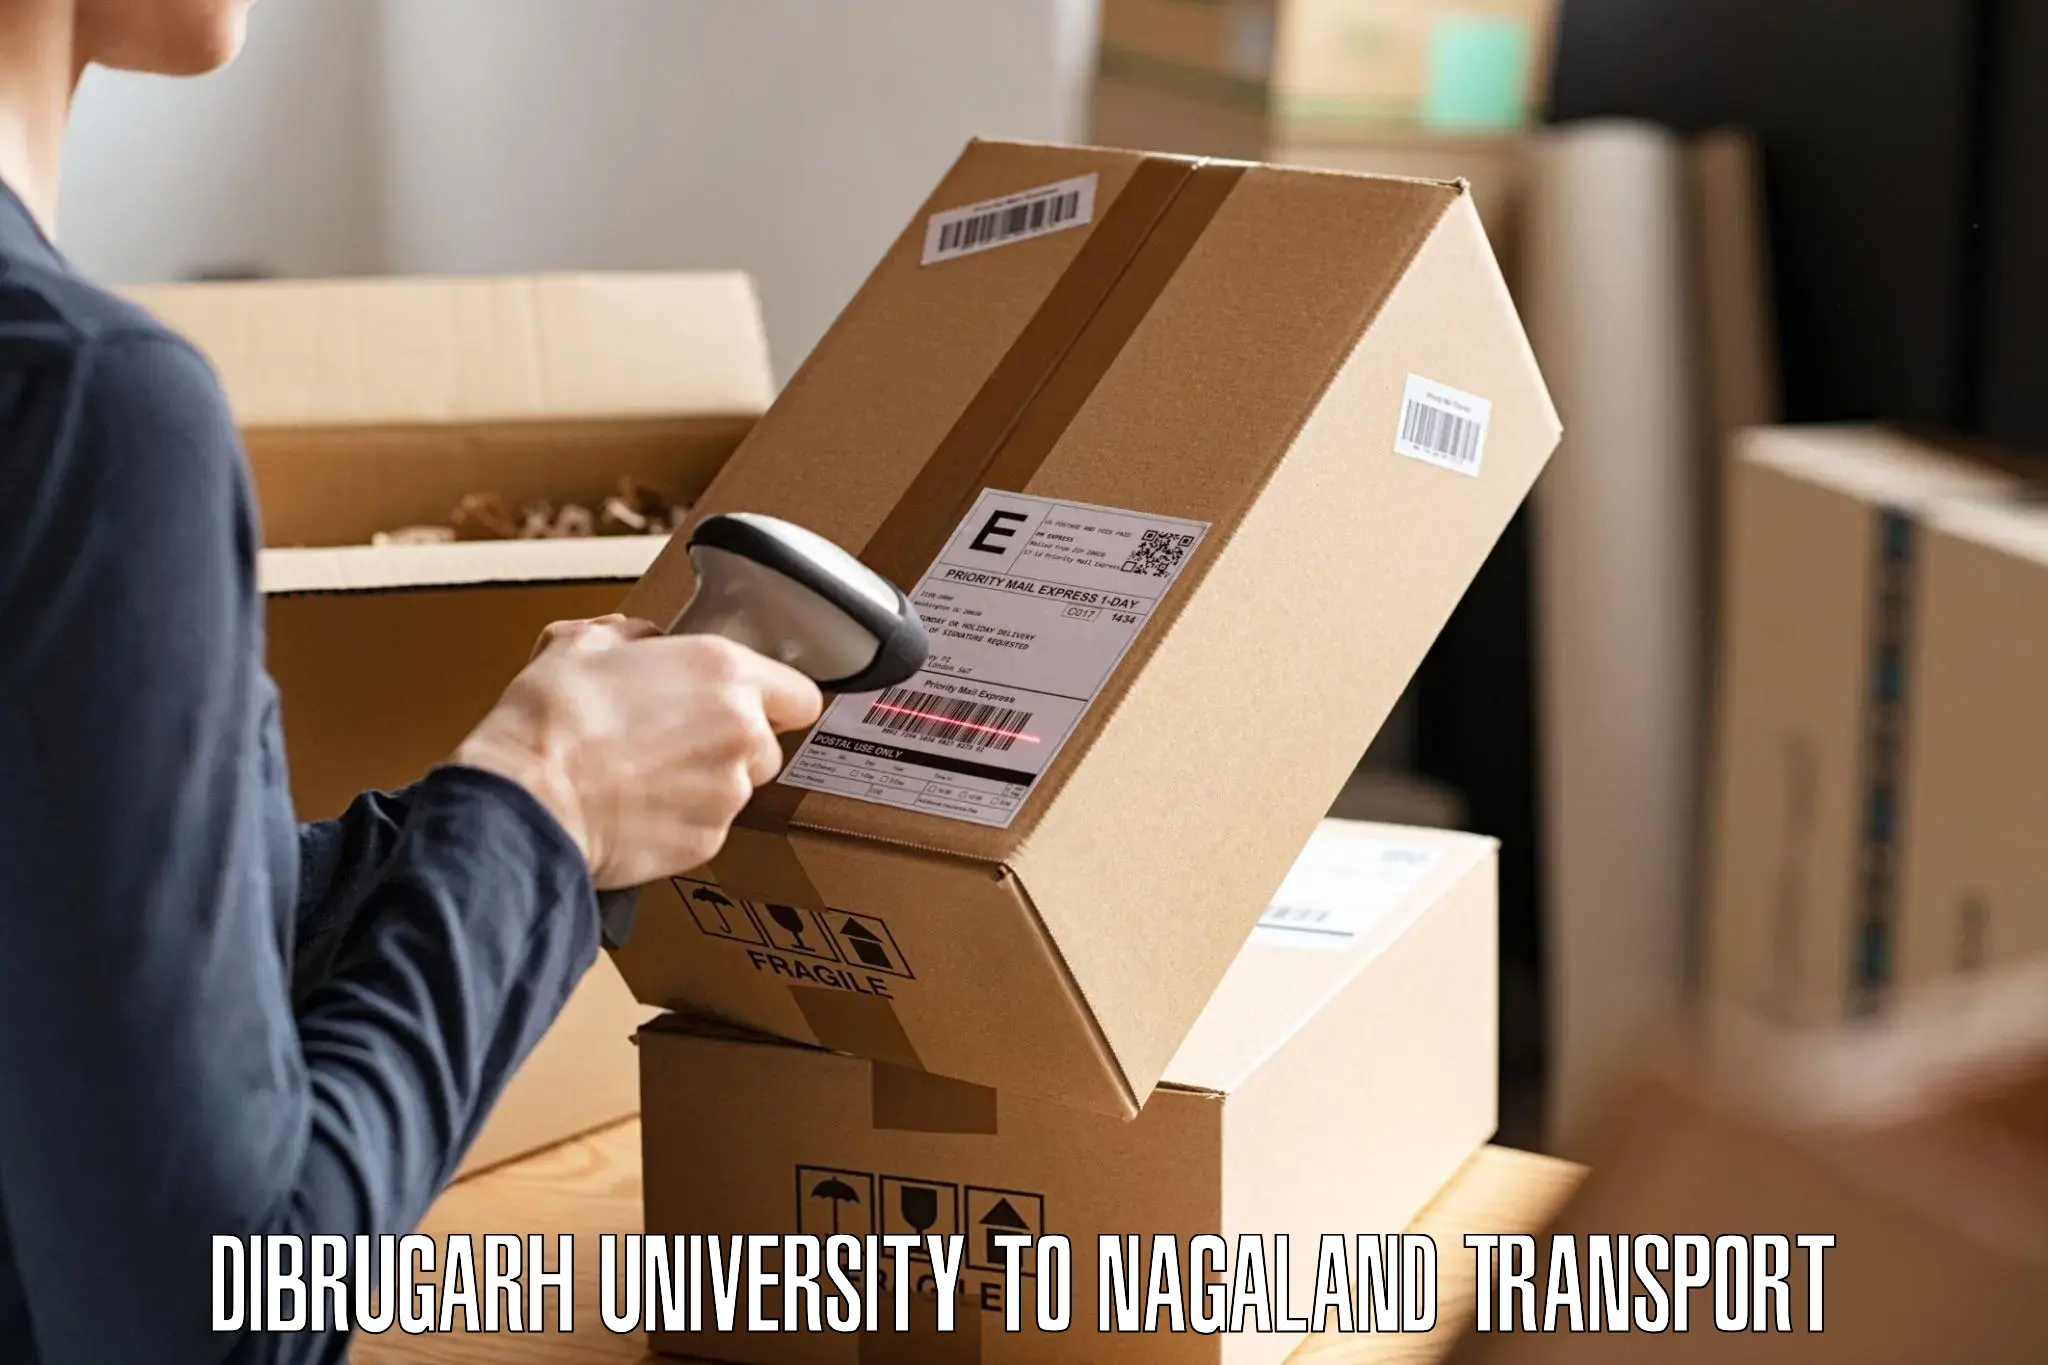 Container transport service Dibrugarh University to NIT Nagaland